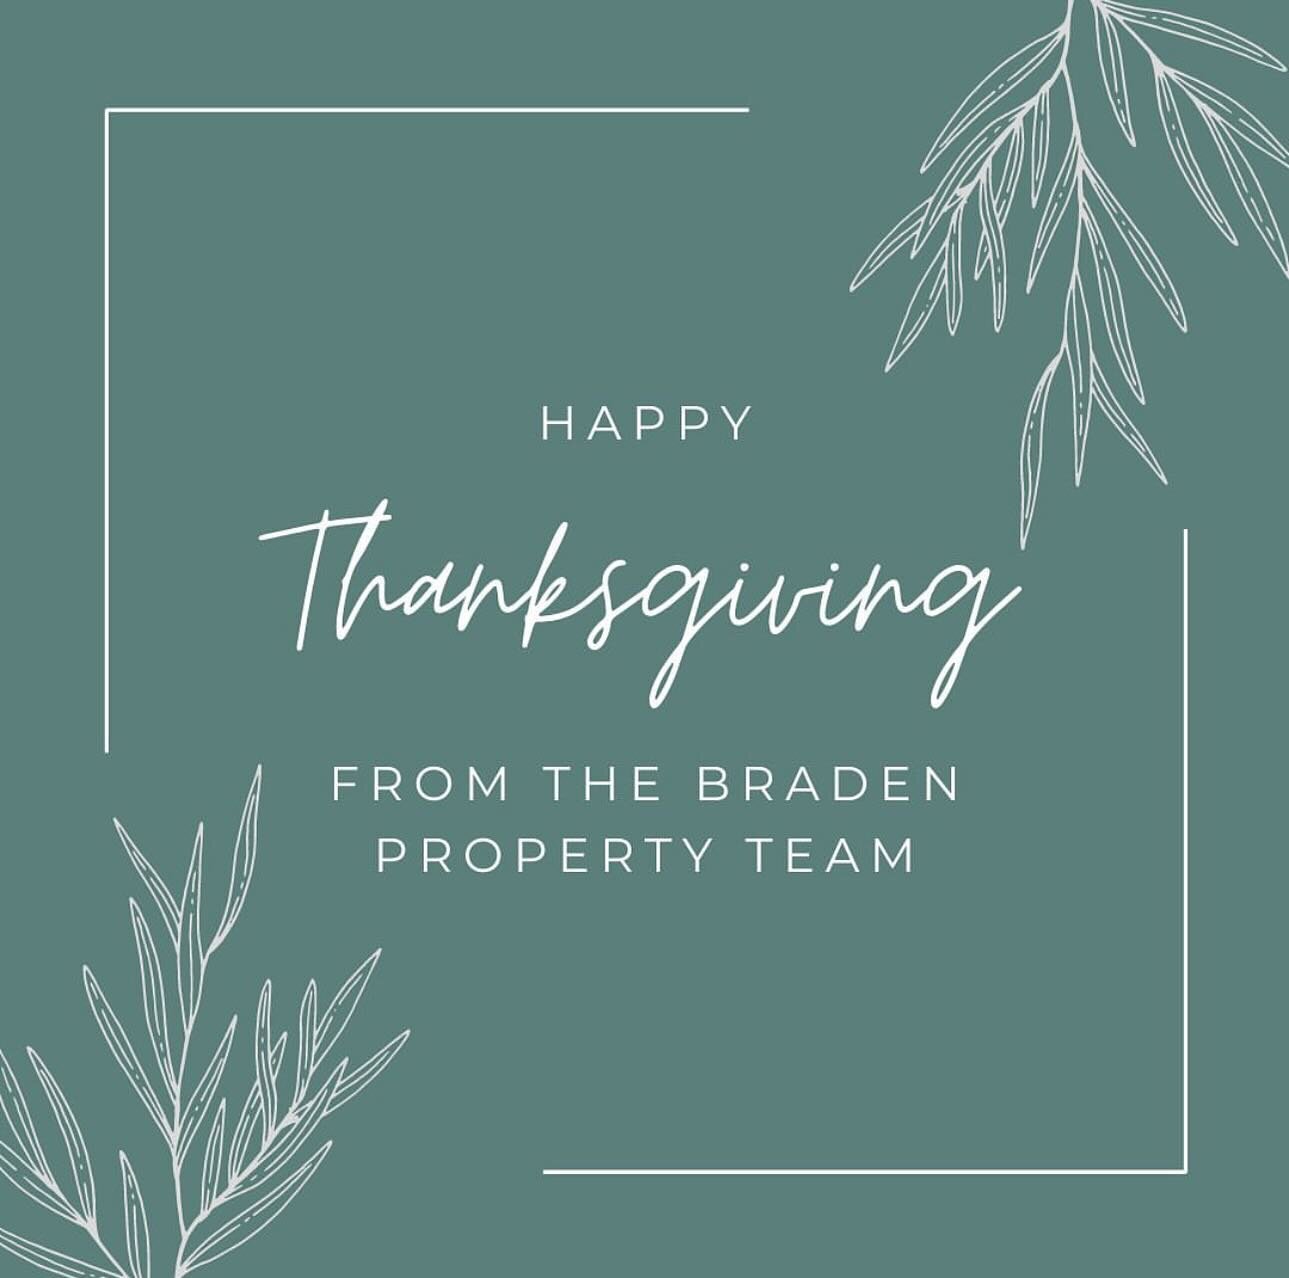 Warmest wishes this Thanksgiving from all of us at BPM. We&rsquo;re truly grateful to be your local property management company!

Our office is closed for the Thanksgiving holiday so that our team can spend time with their loved ones. We will be retu